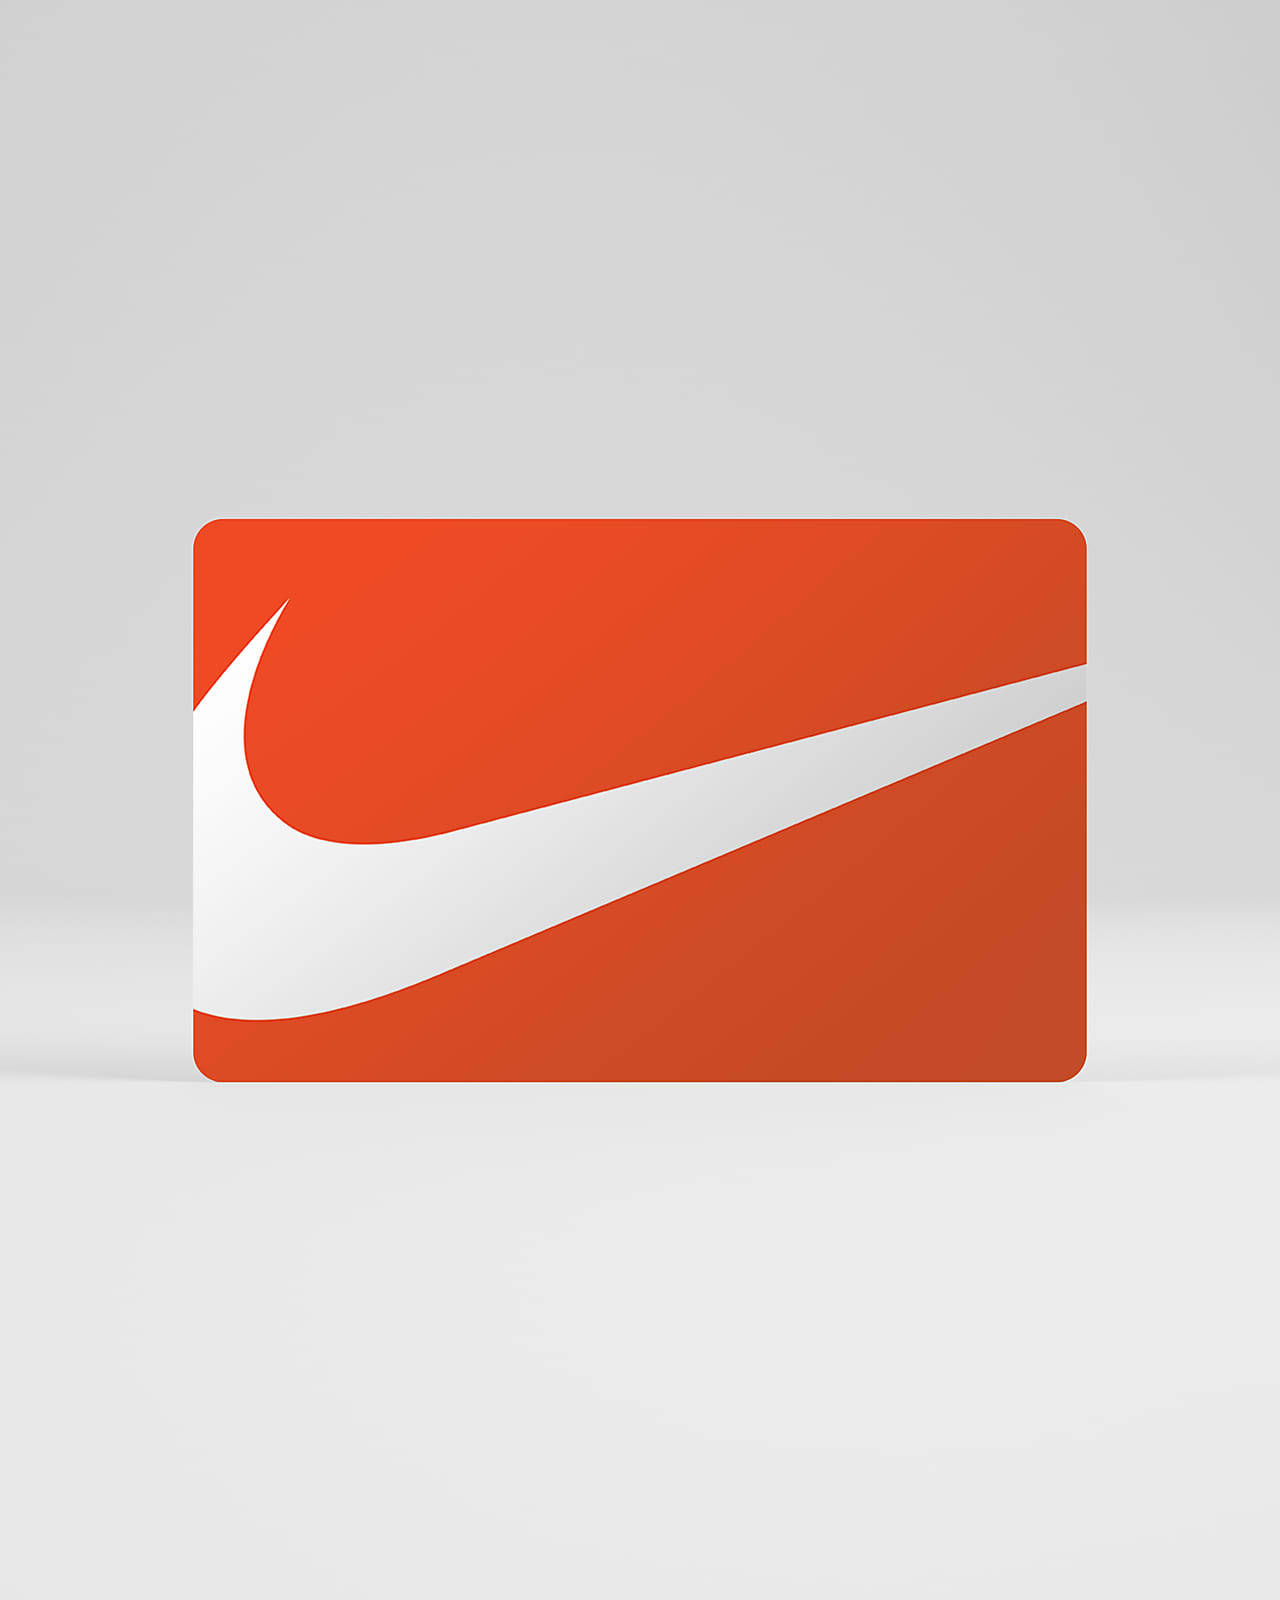 where can i use my nike gift card online